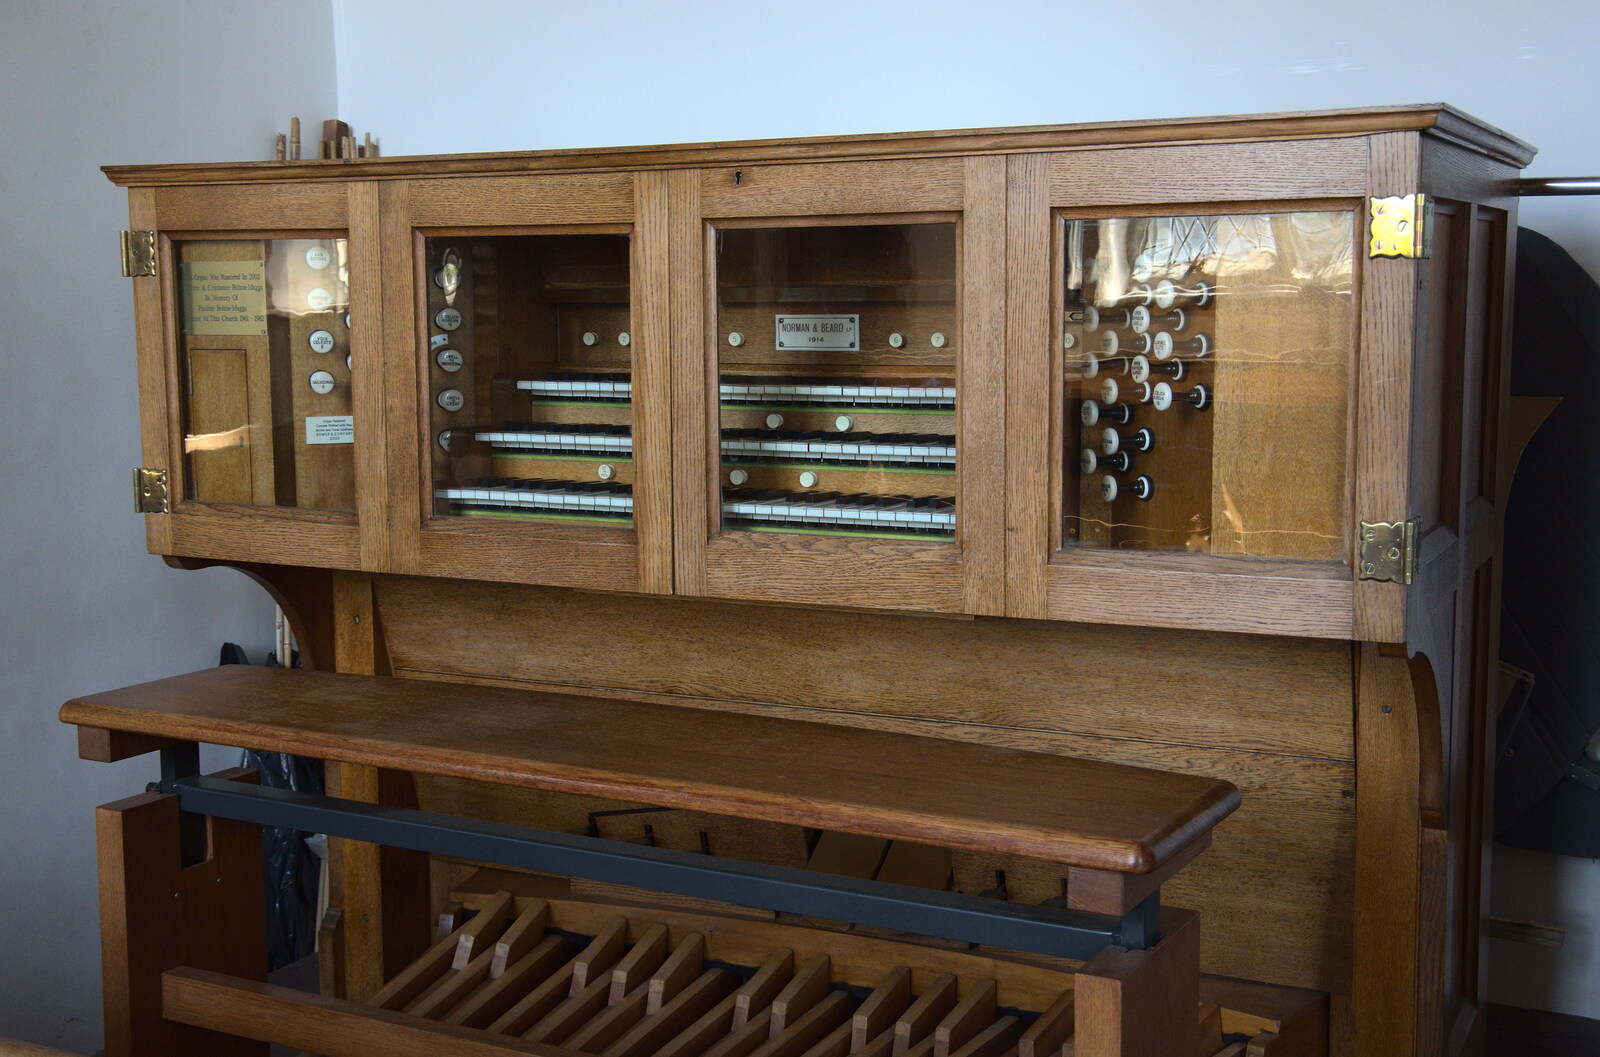 A nice Norman and Beard organ, restored in 2002 from Camping at Forest Park, Cromer, Norfolk - 12th August 2022